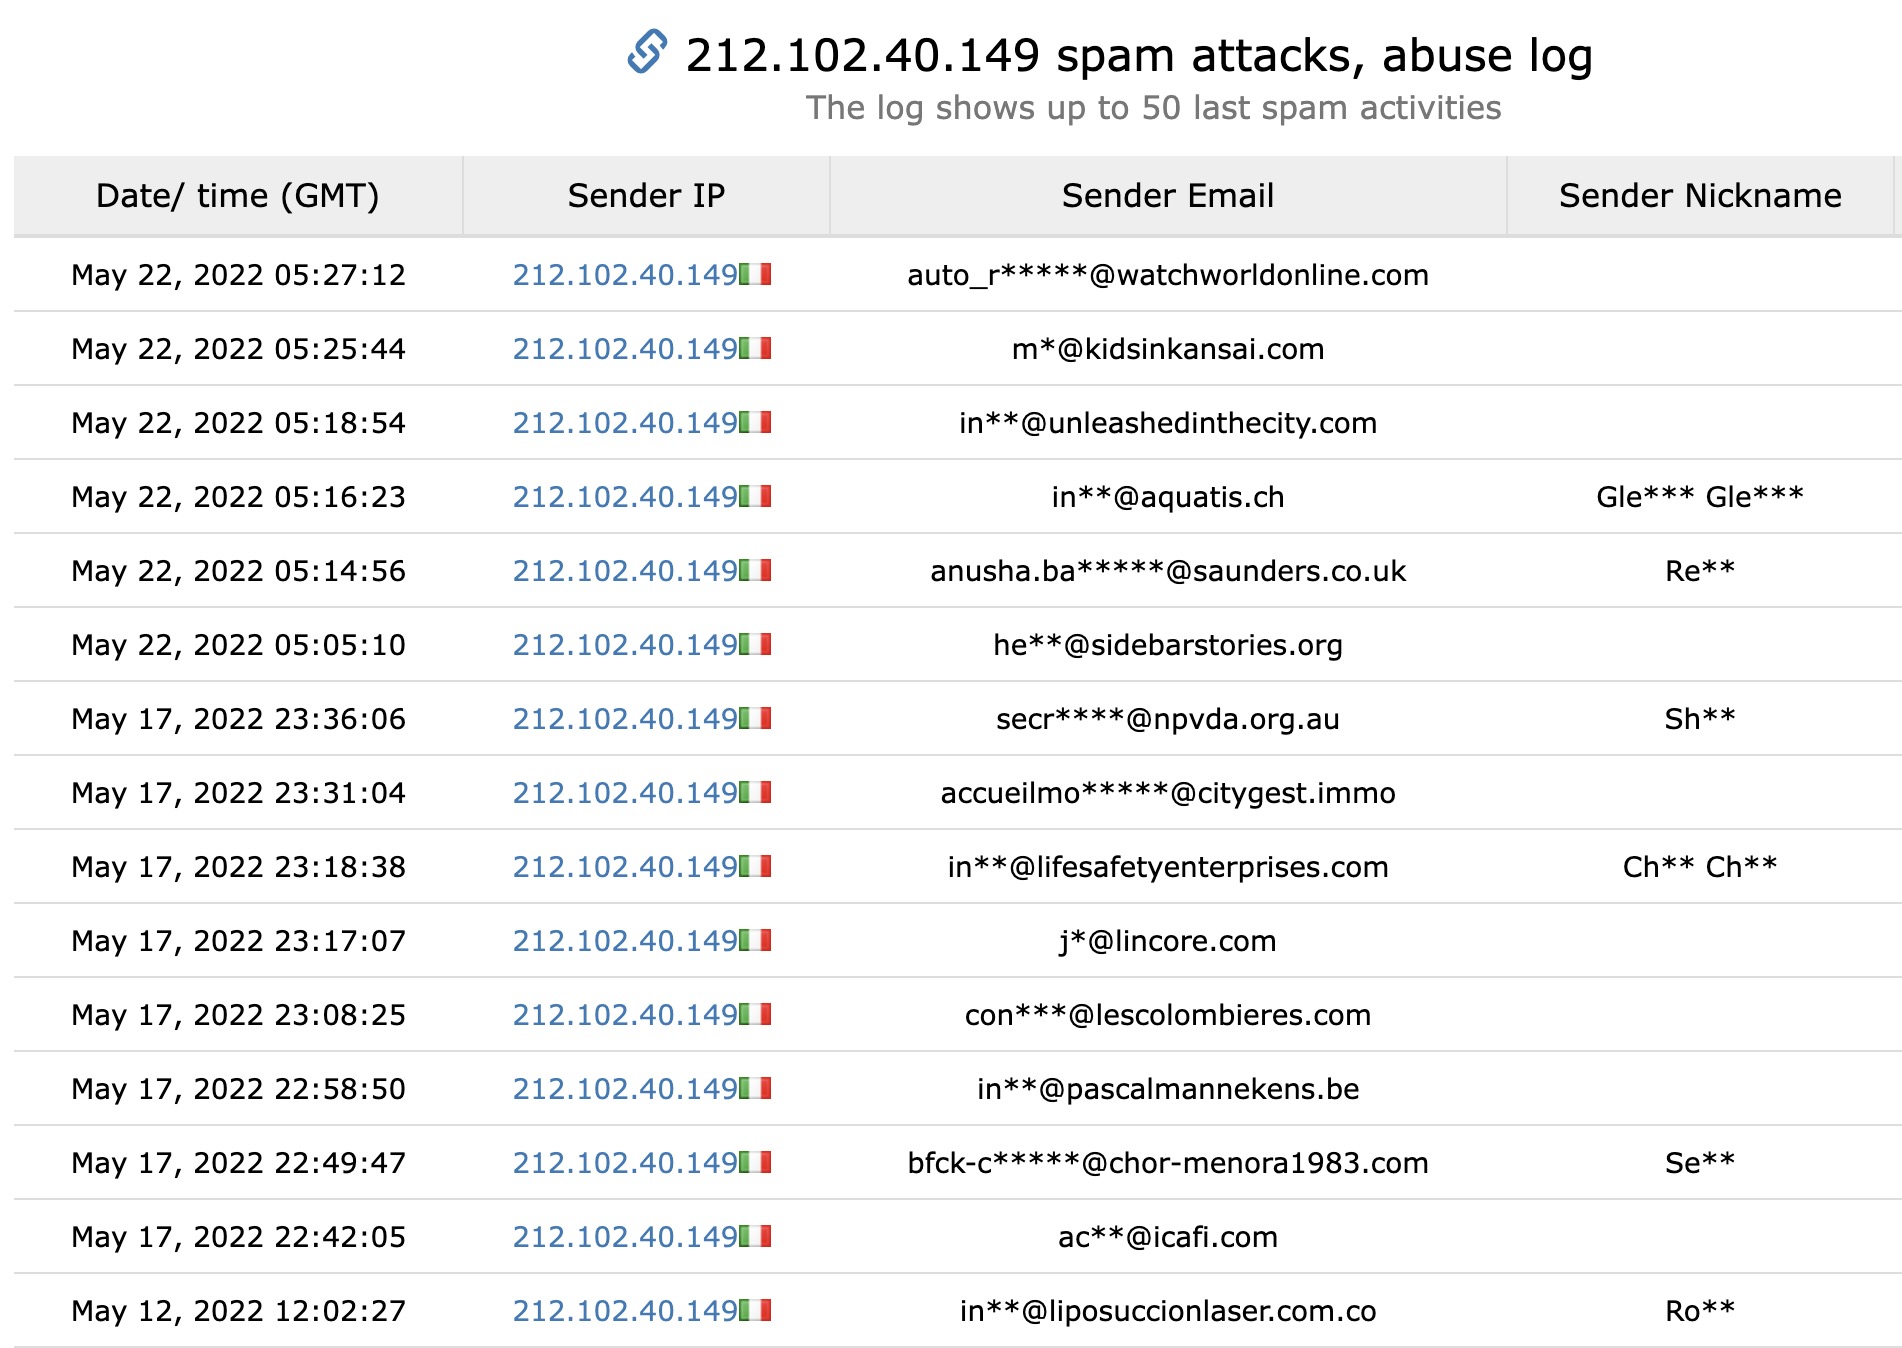 Spam, Brute Force attack by pre-programmed bots or software launch from hosting